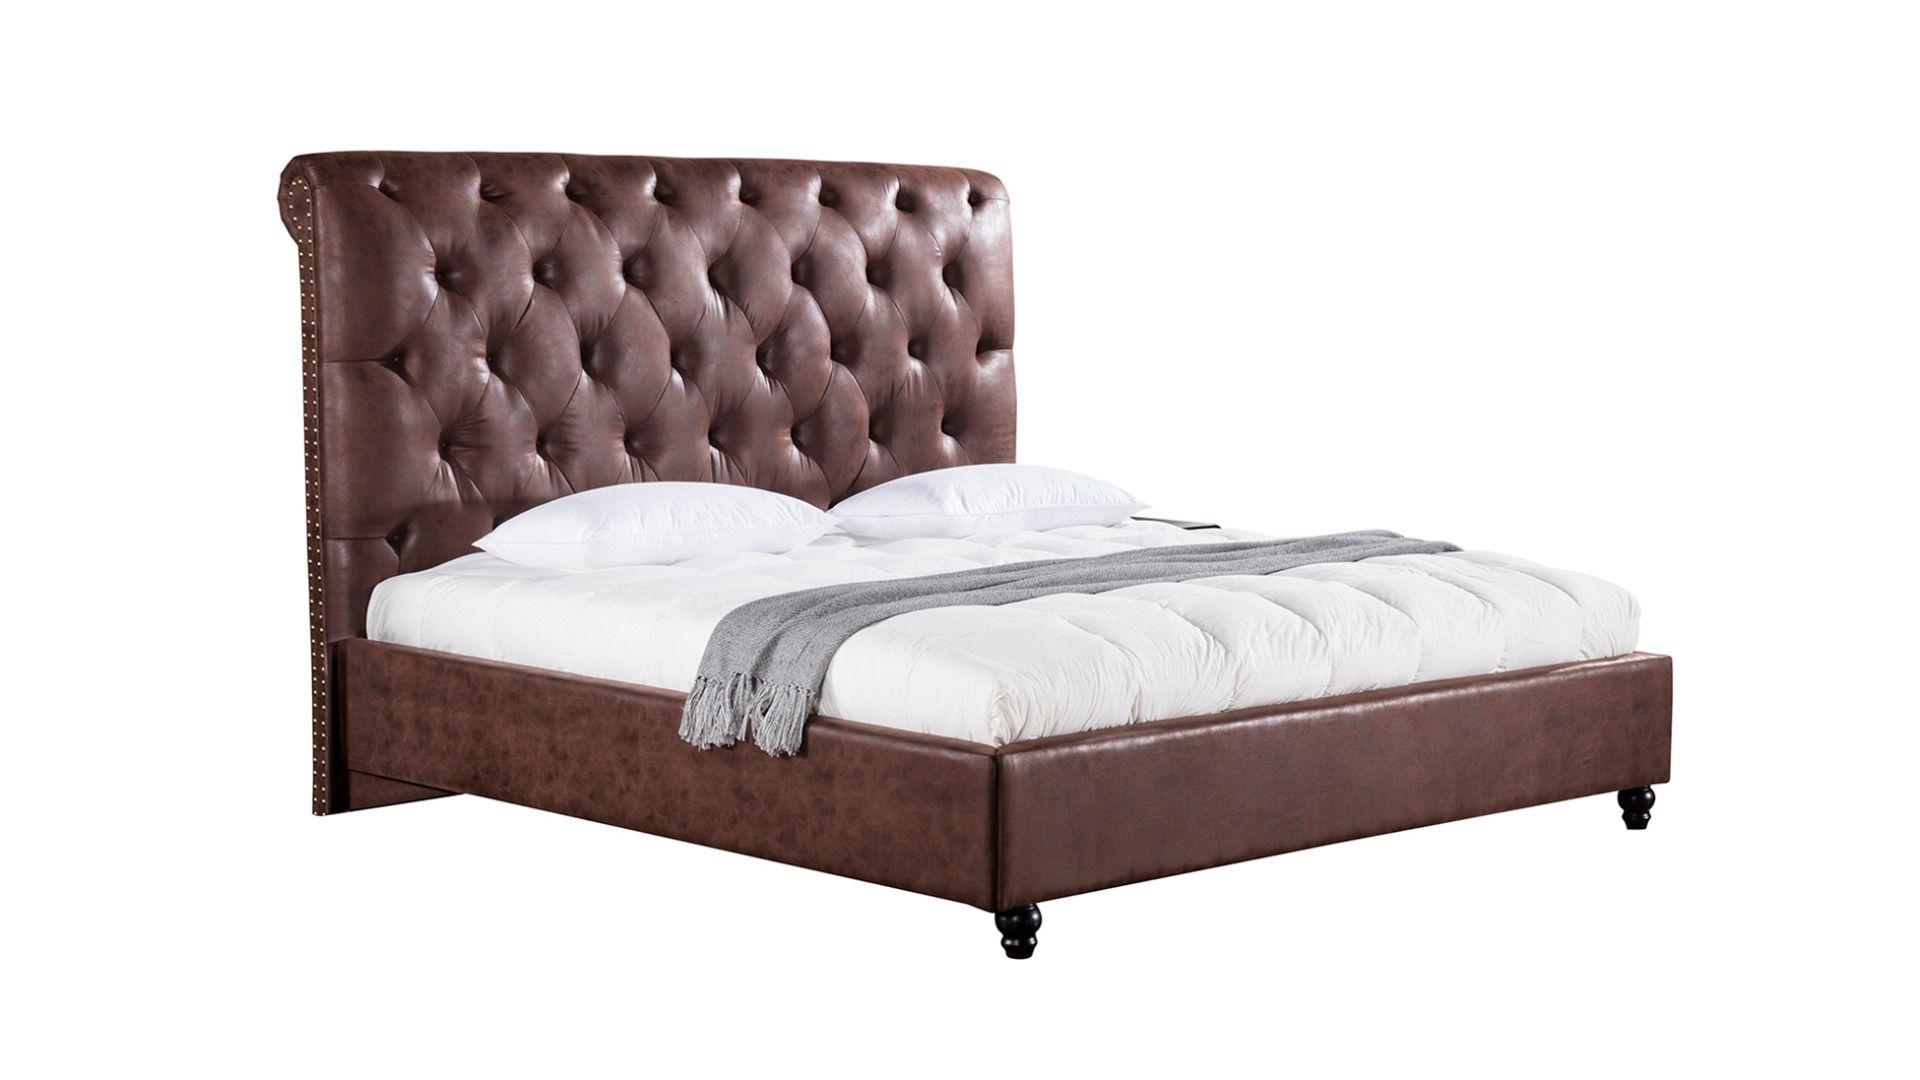 

    
Brown Leather Air CAL King Size Bed Tufted Headboard American Eagle B-D061
